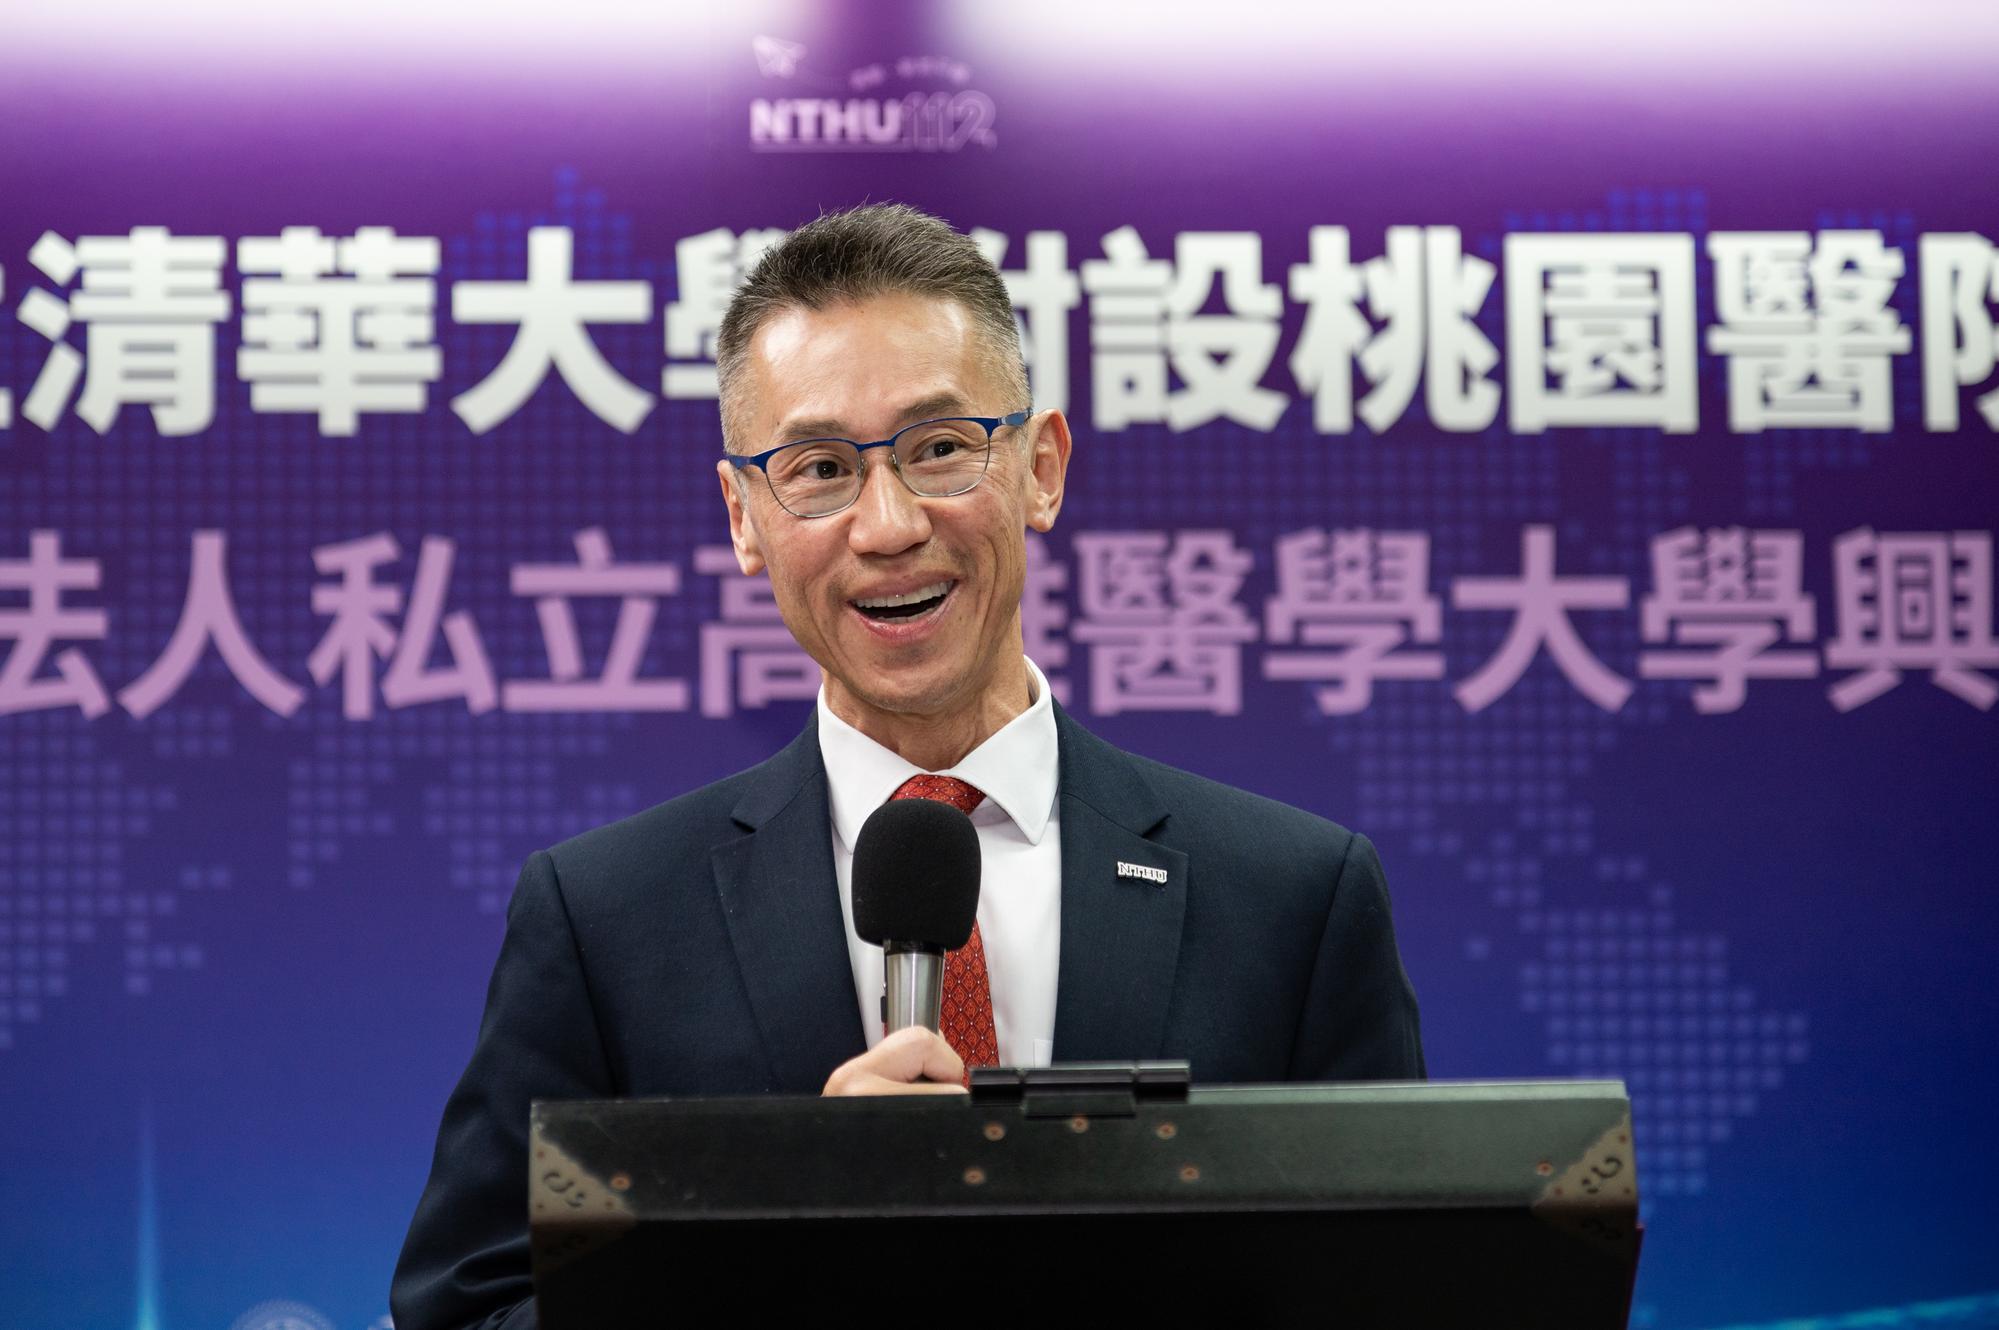 NTHU President W. John Kao (高為元) expressed hope that the NTHU Hospital will serve as a cutting-edge medical education platform, nurturing future physicians with diverse perspectives.